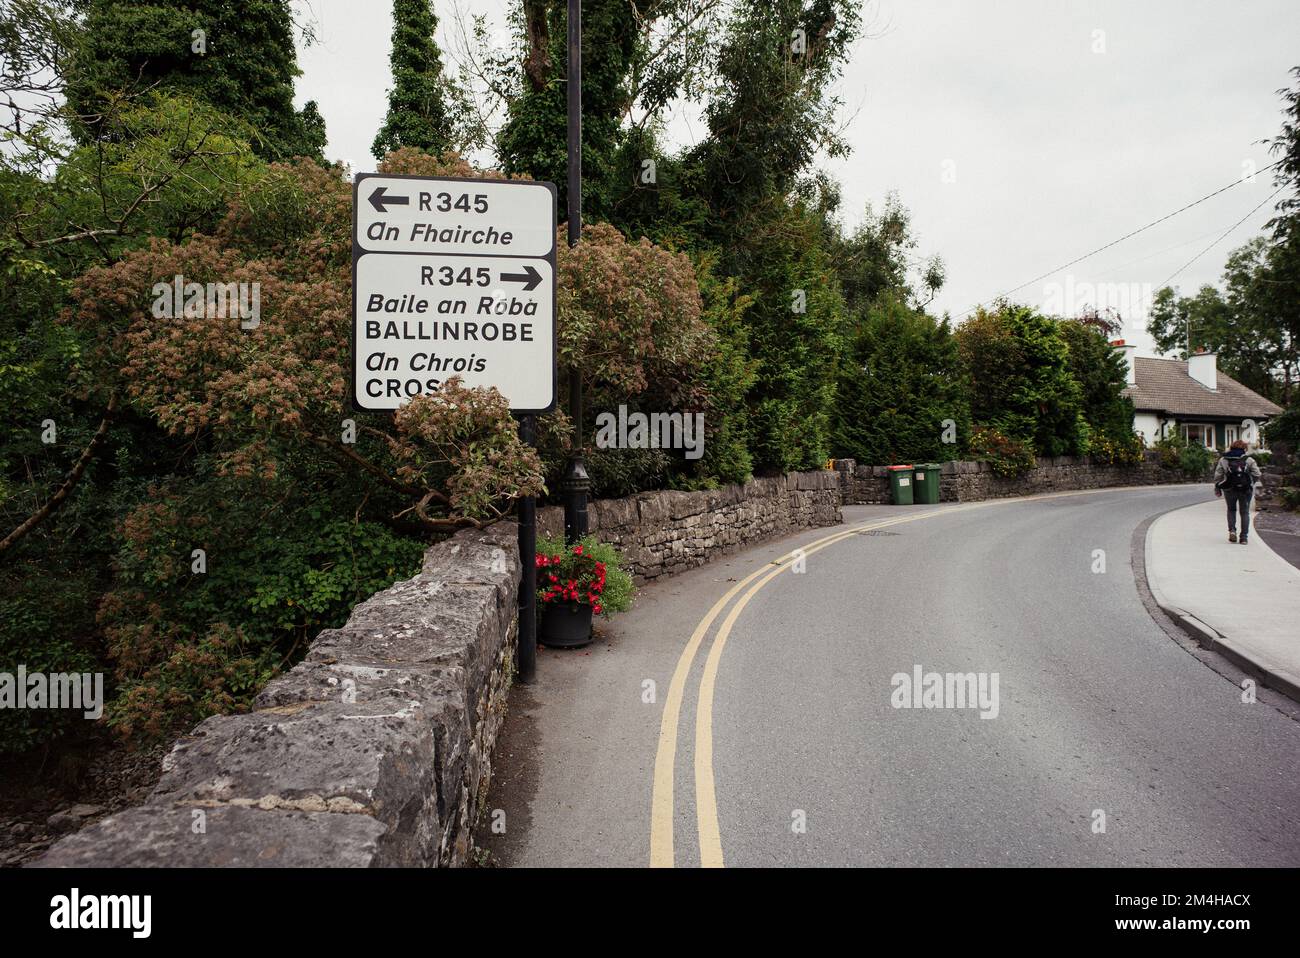 Beautiful cottage city of Cong in Ireland - The quiet man movie location Stock Photo